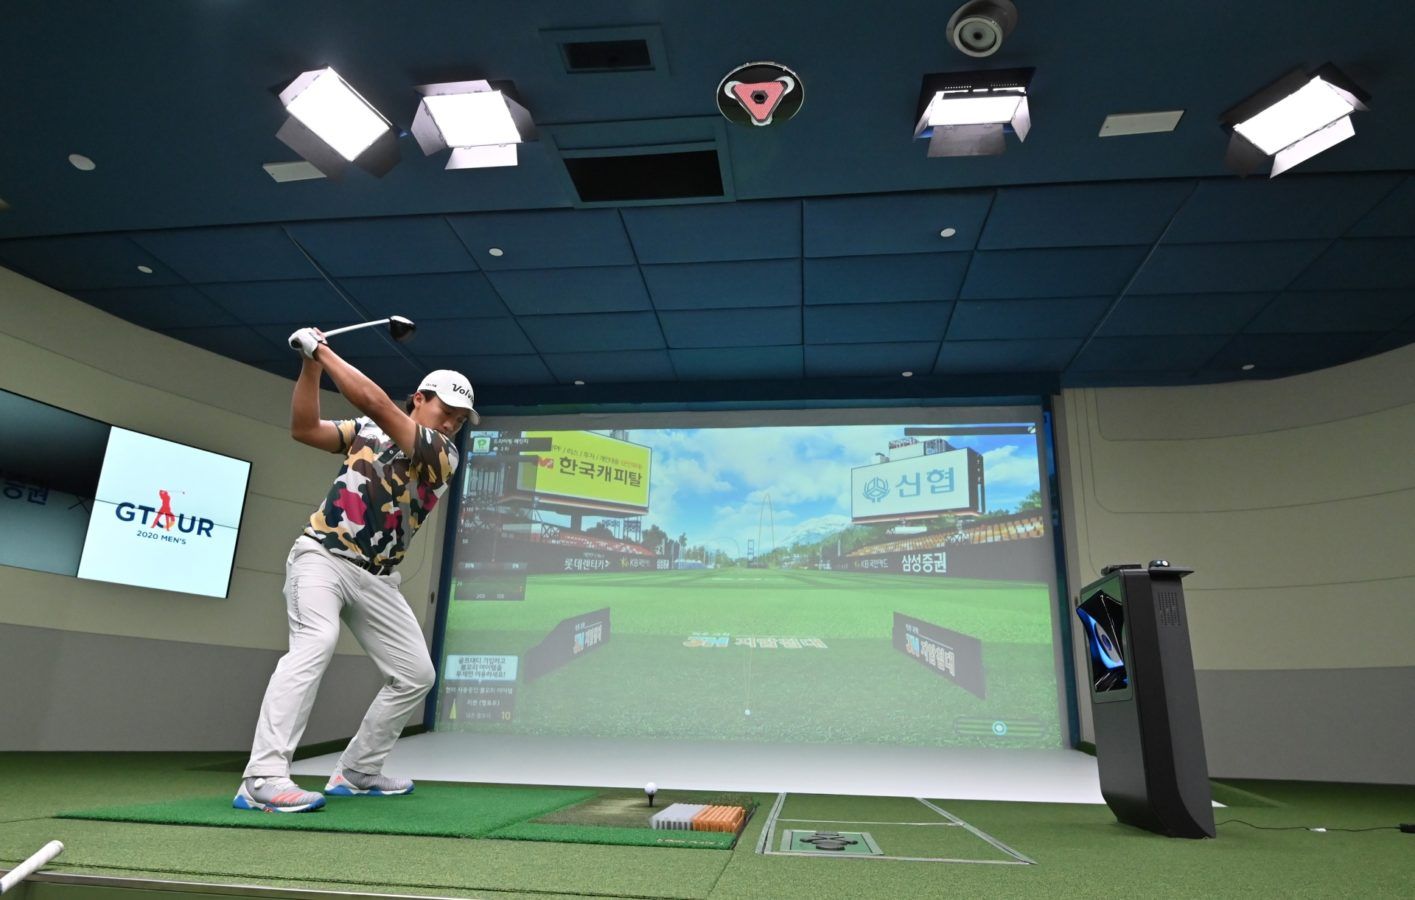 What’s up with the hype behind screen golf in South Korea?